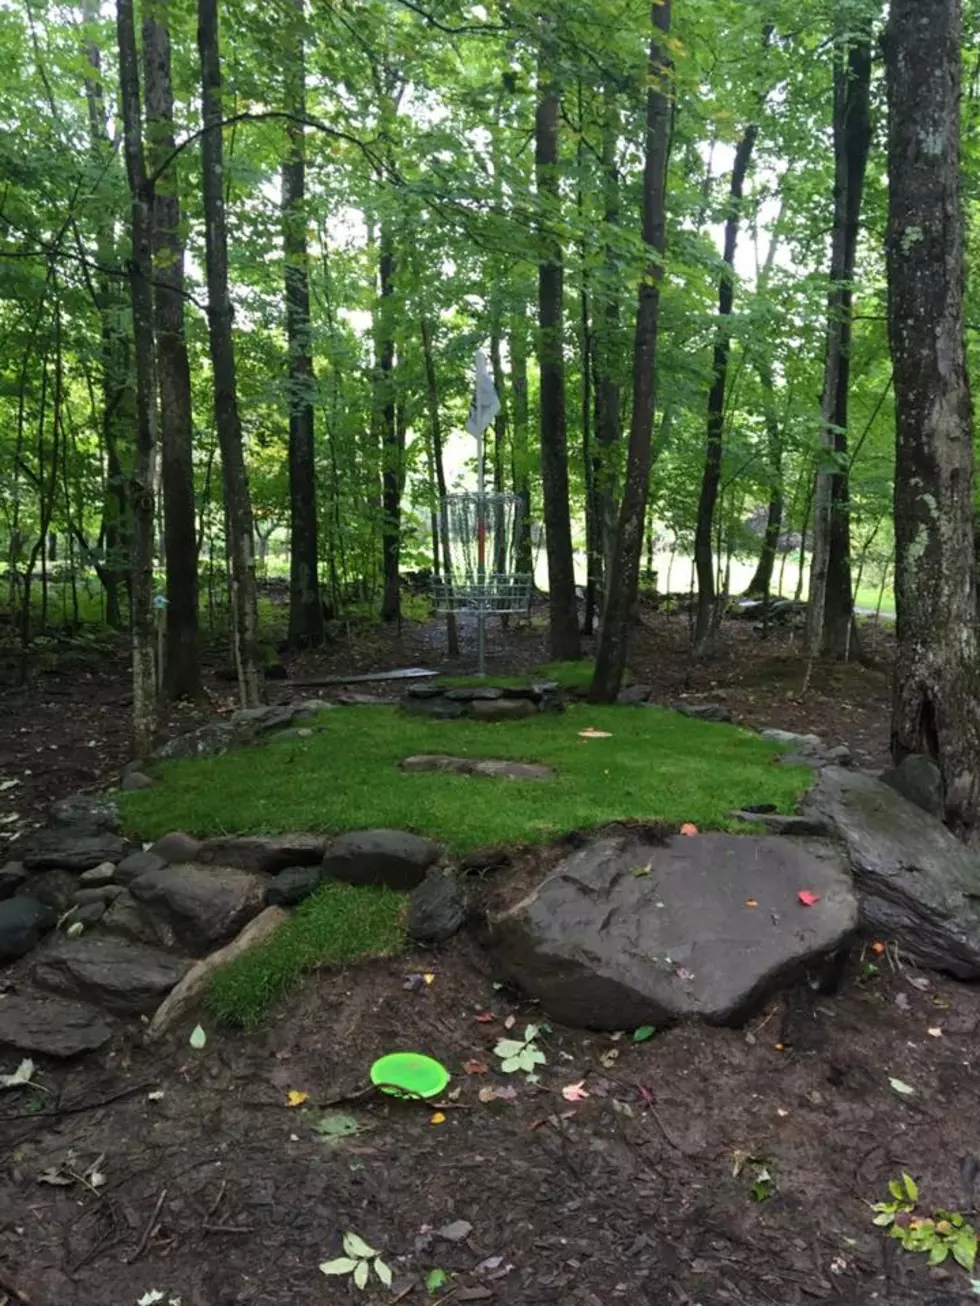 Will Danbury Ever Get on Board With the Sport of Disc Golf?